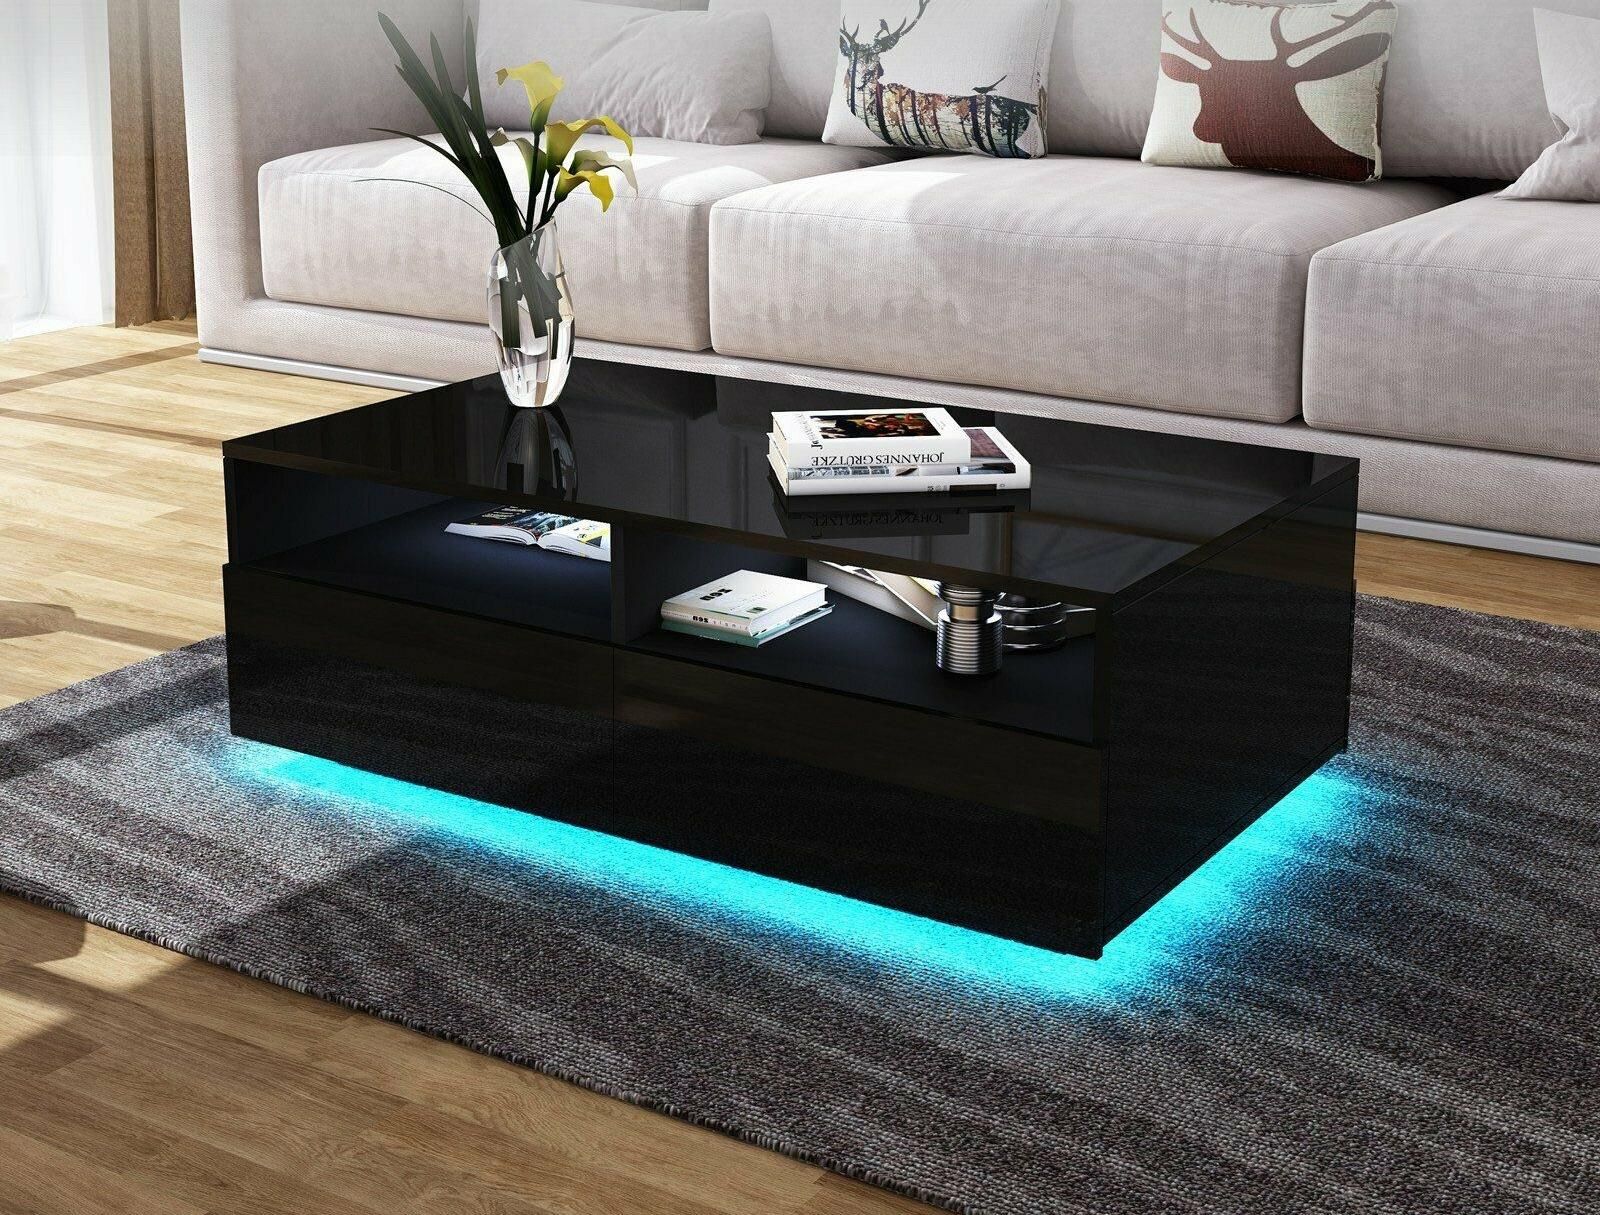 Living Room Rectangle Coffee Table 4 Drawers Rgb 16 Color Led Lights | Ebay With Led Coffee Tables With 4 Drawers (Photo 12 of 15)